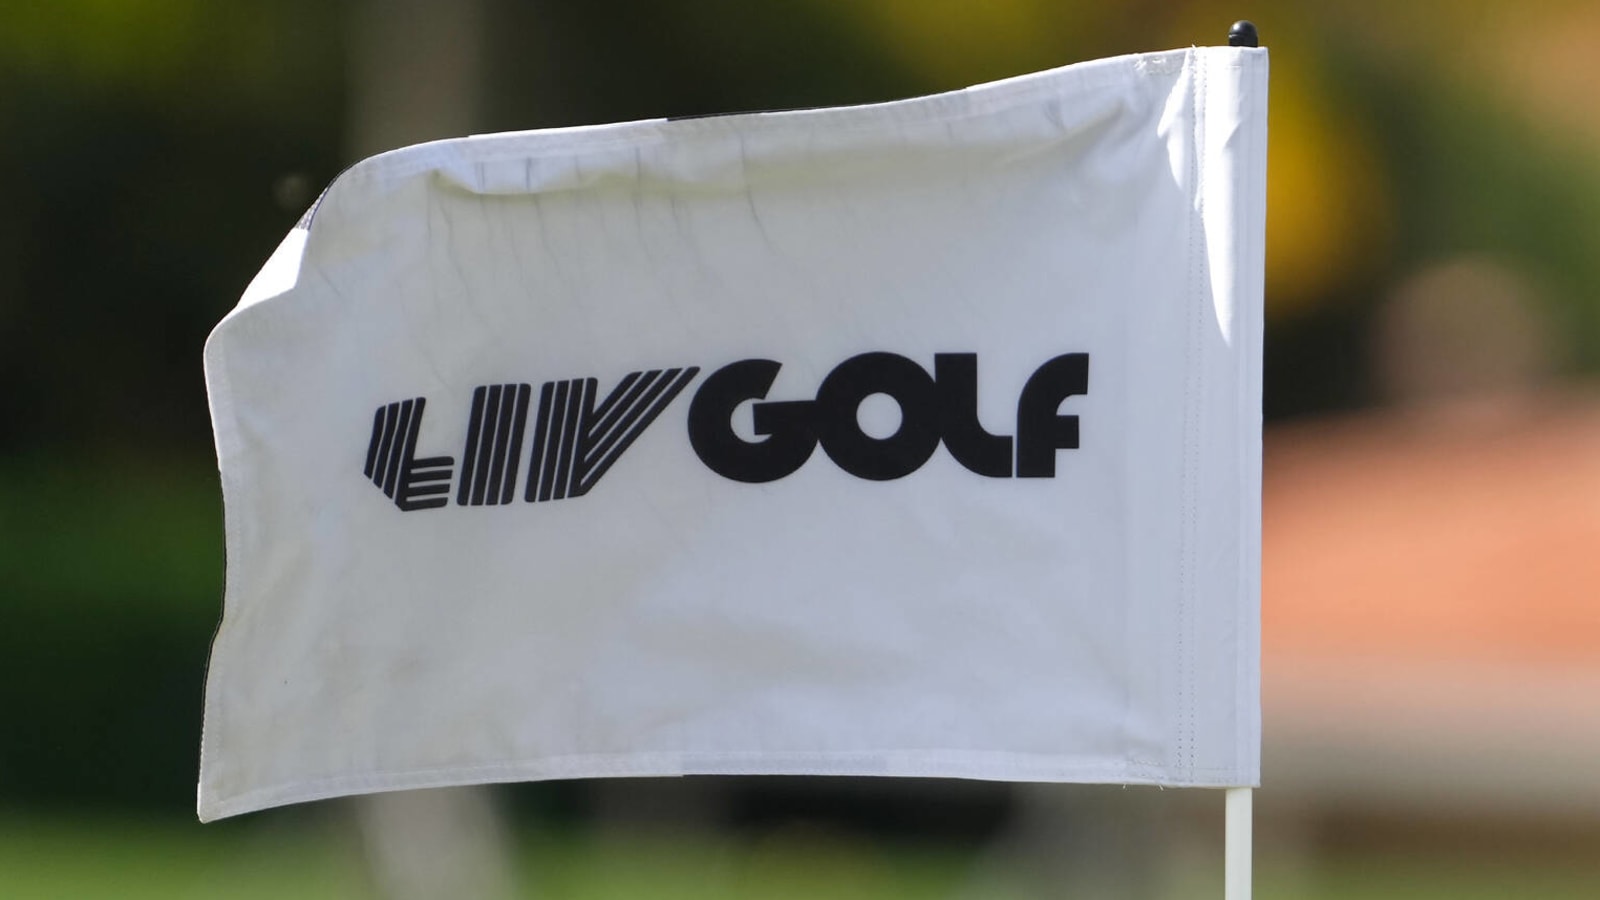 Here's what it might be like if a LIV Golfer rejoined the PGA Tour